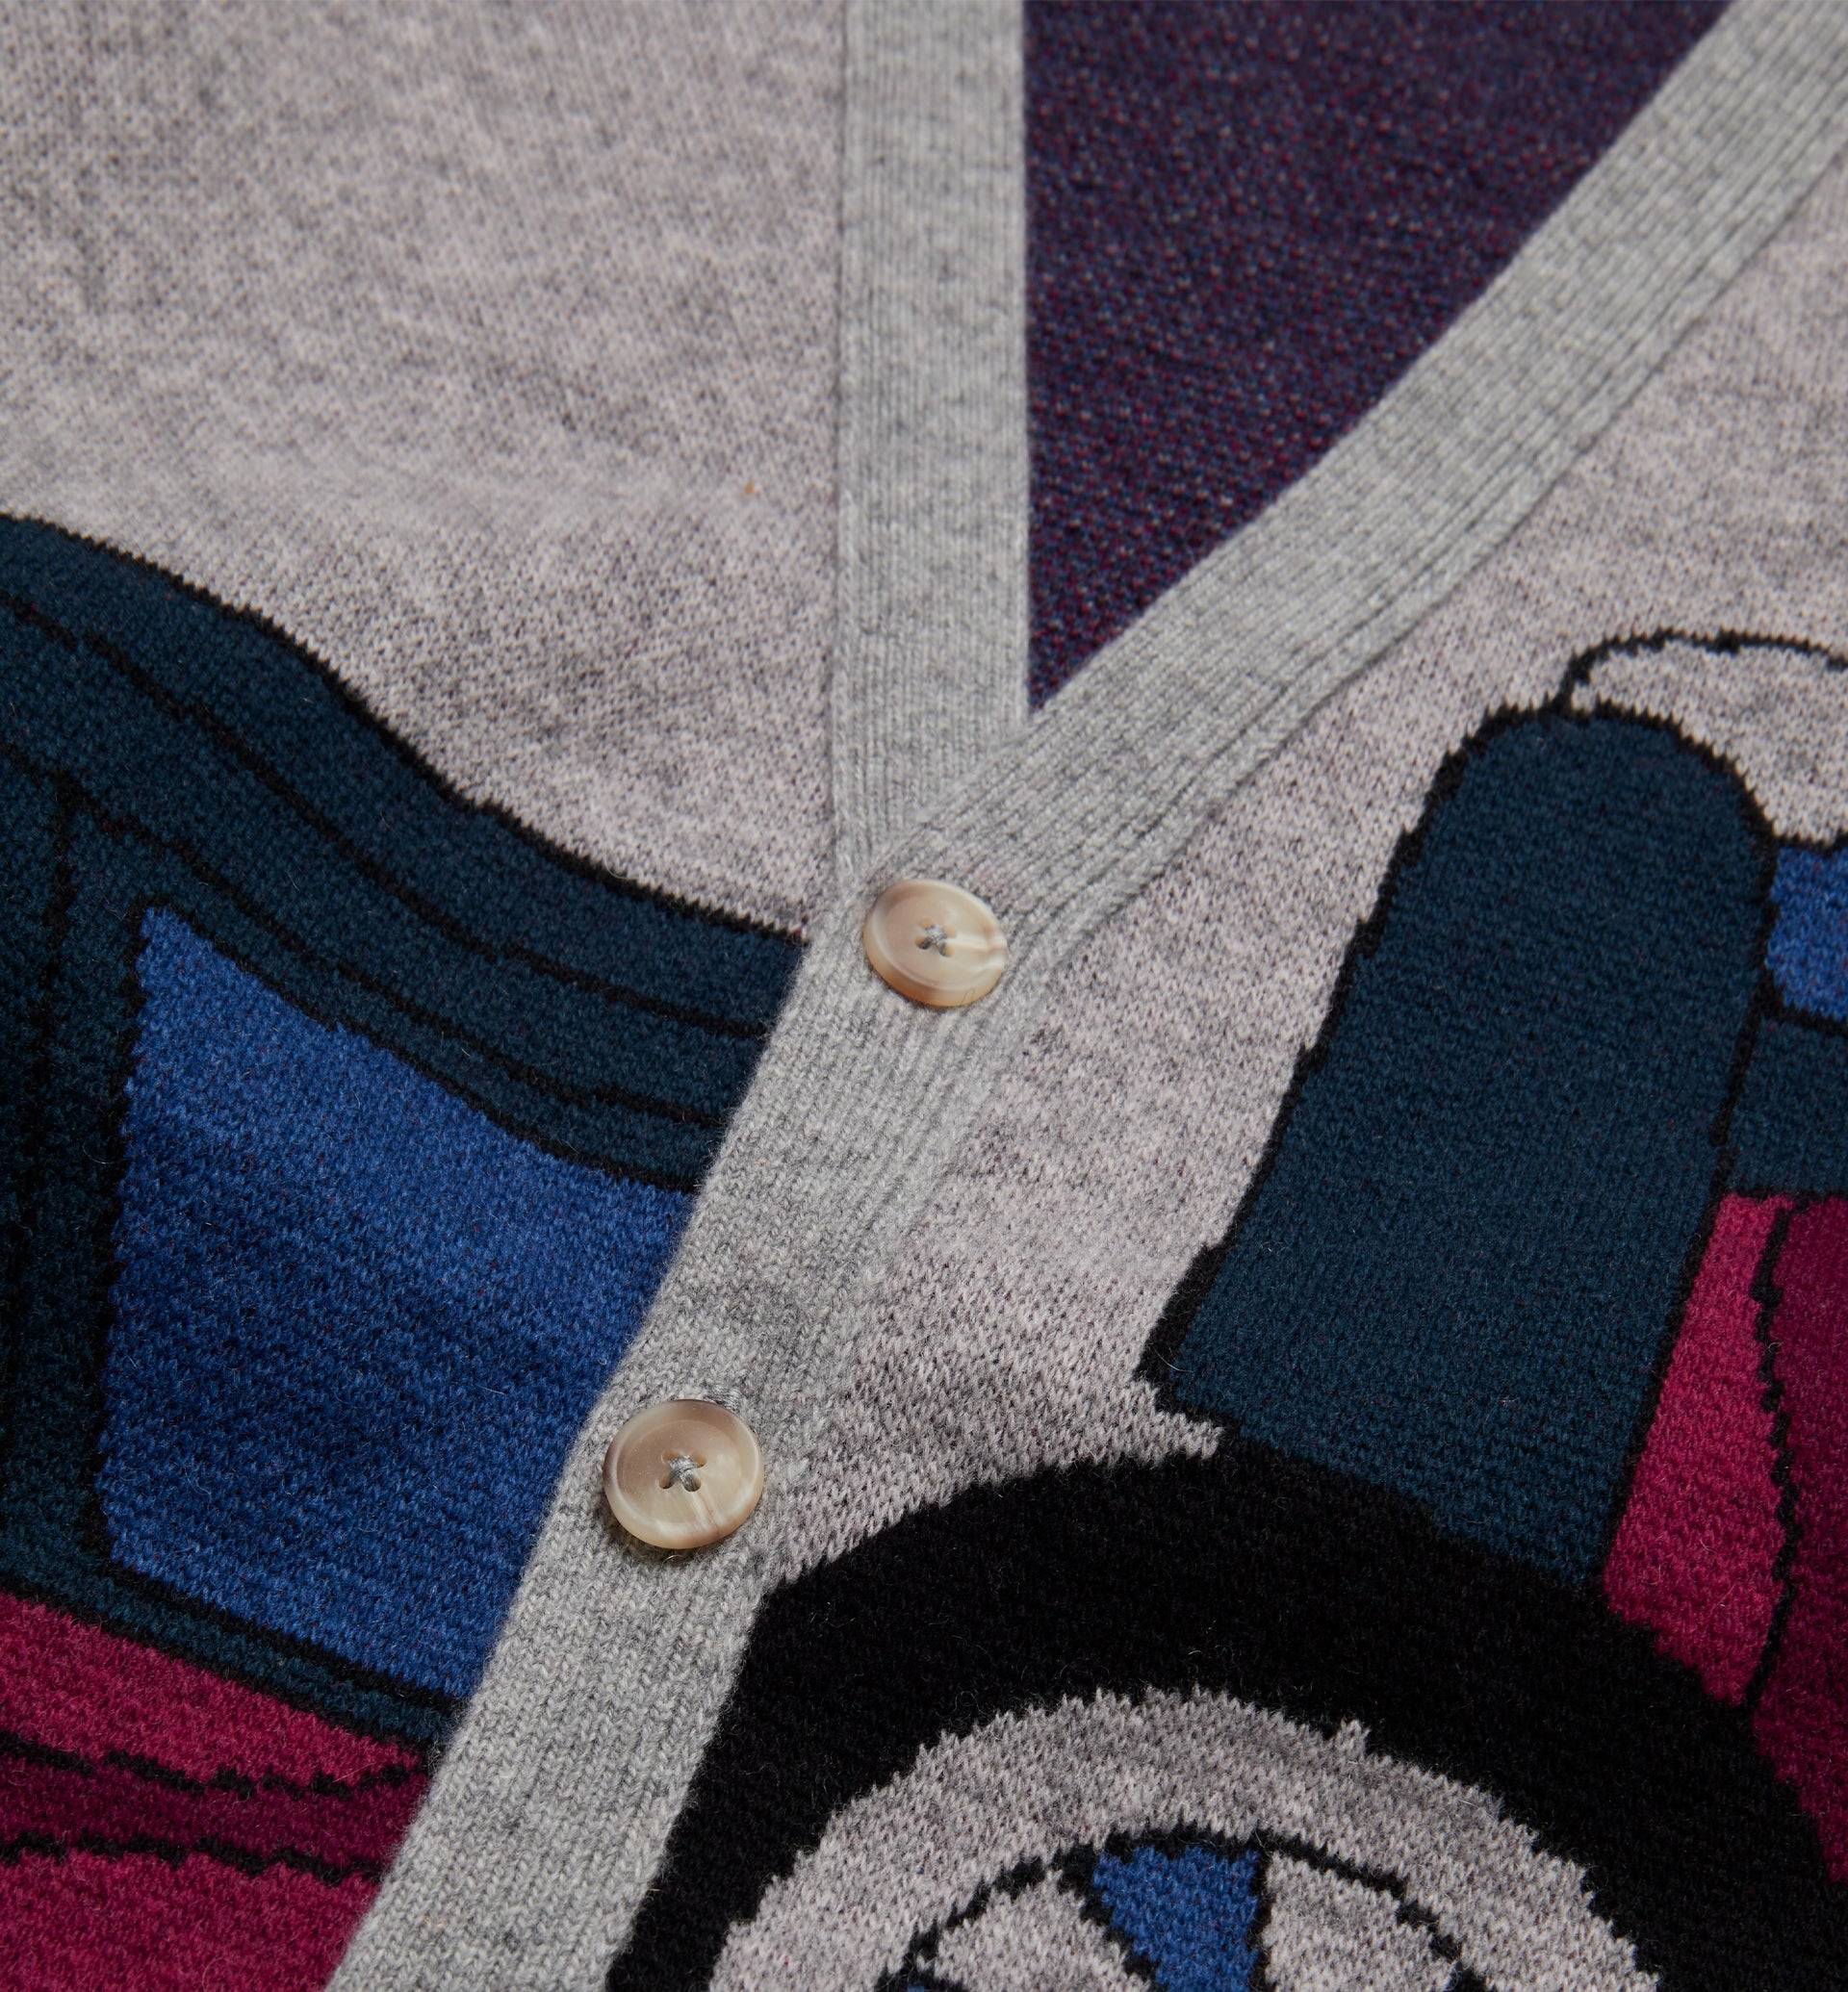 Parra - no parking knitted cardigan